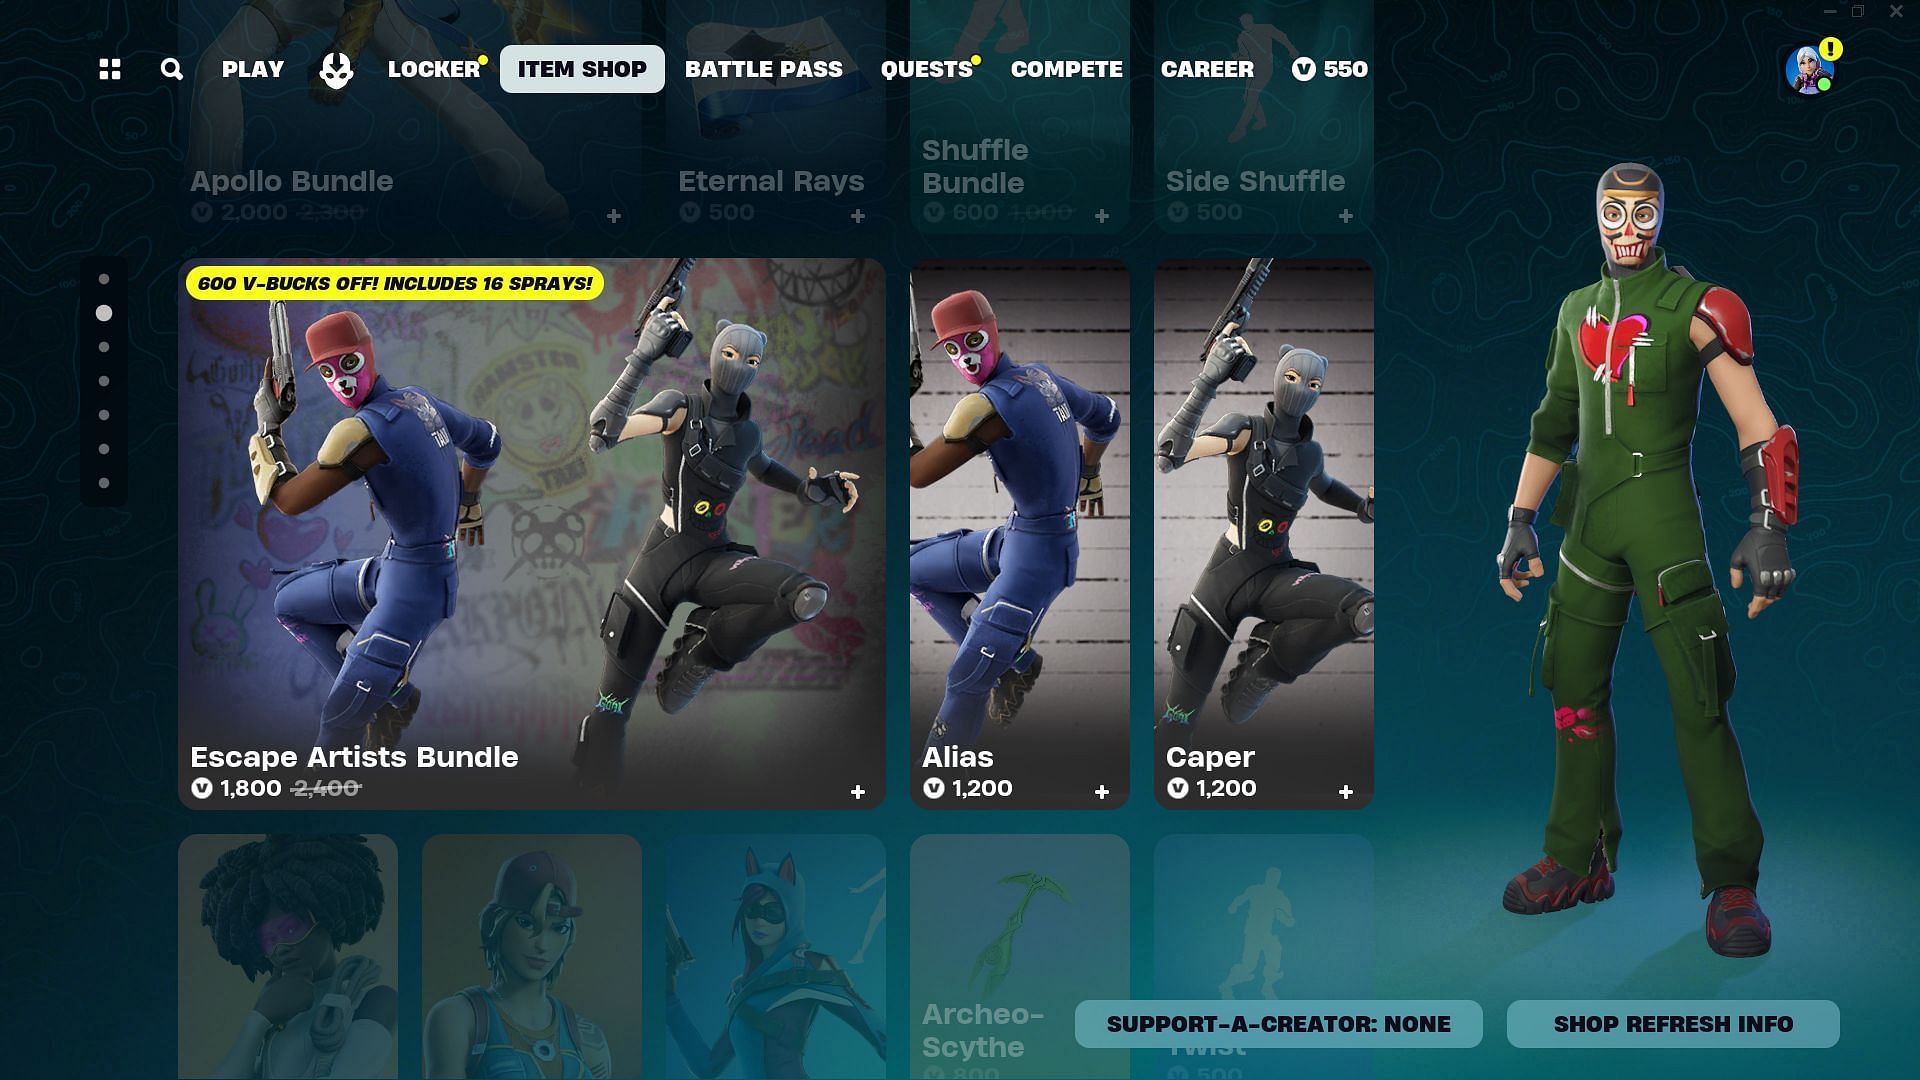 Alias and Caper skins are currently listed in the Item Shop (Image via Epic Games/Fortnite)